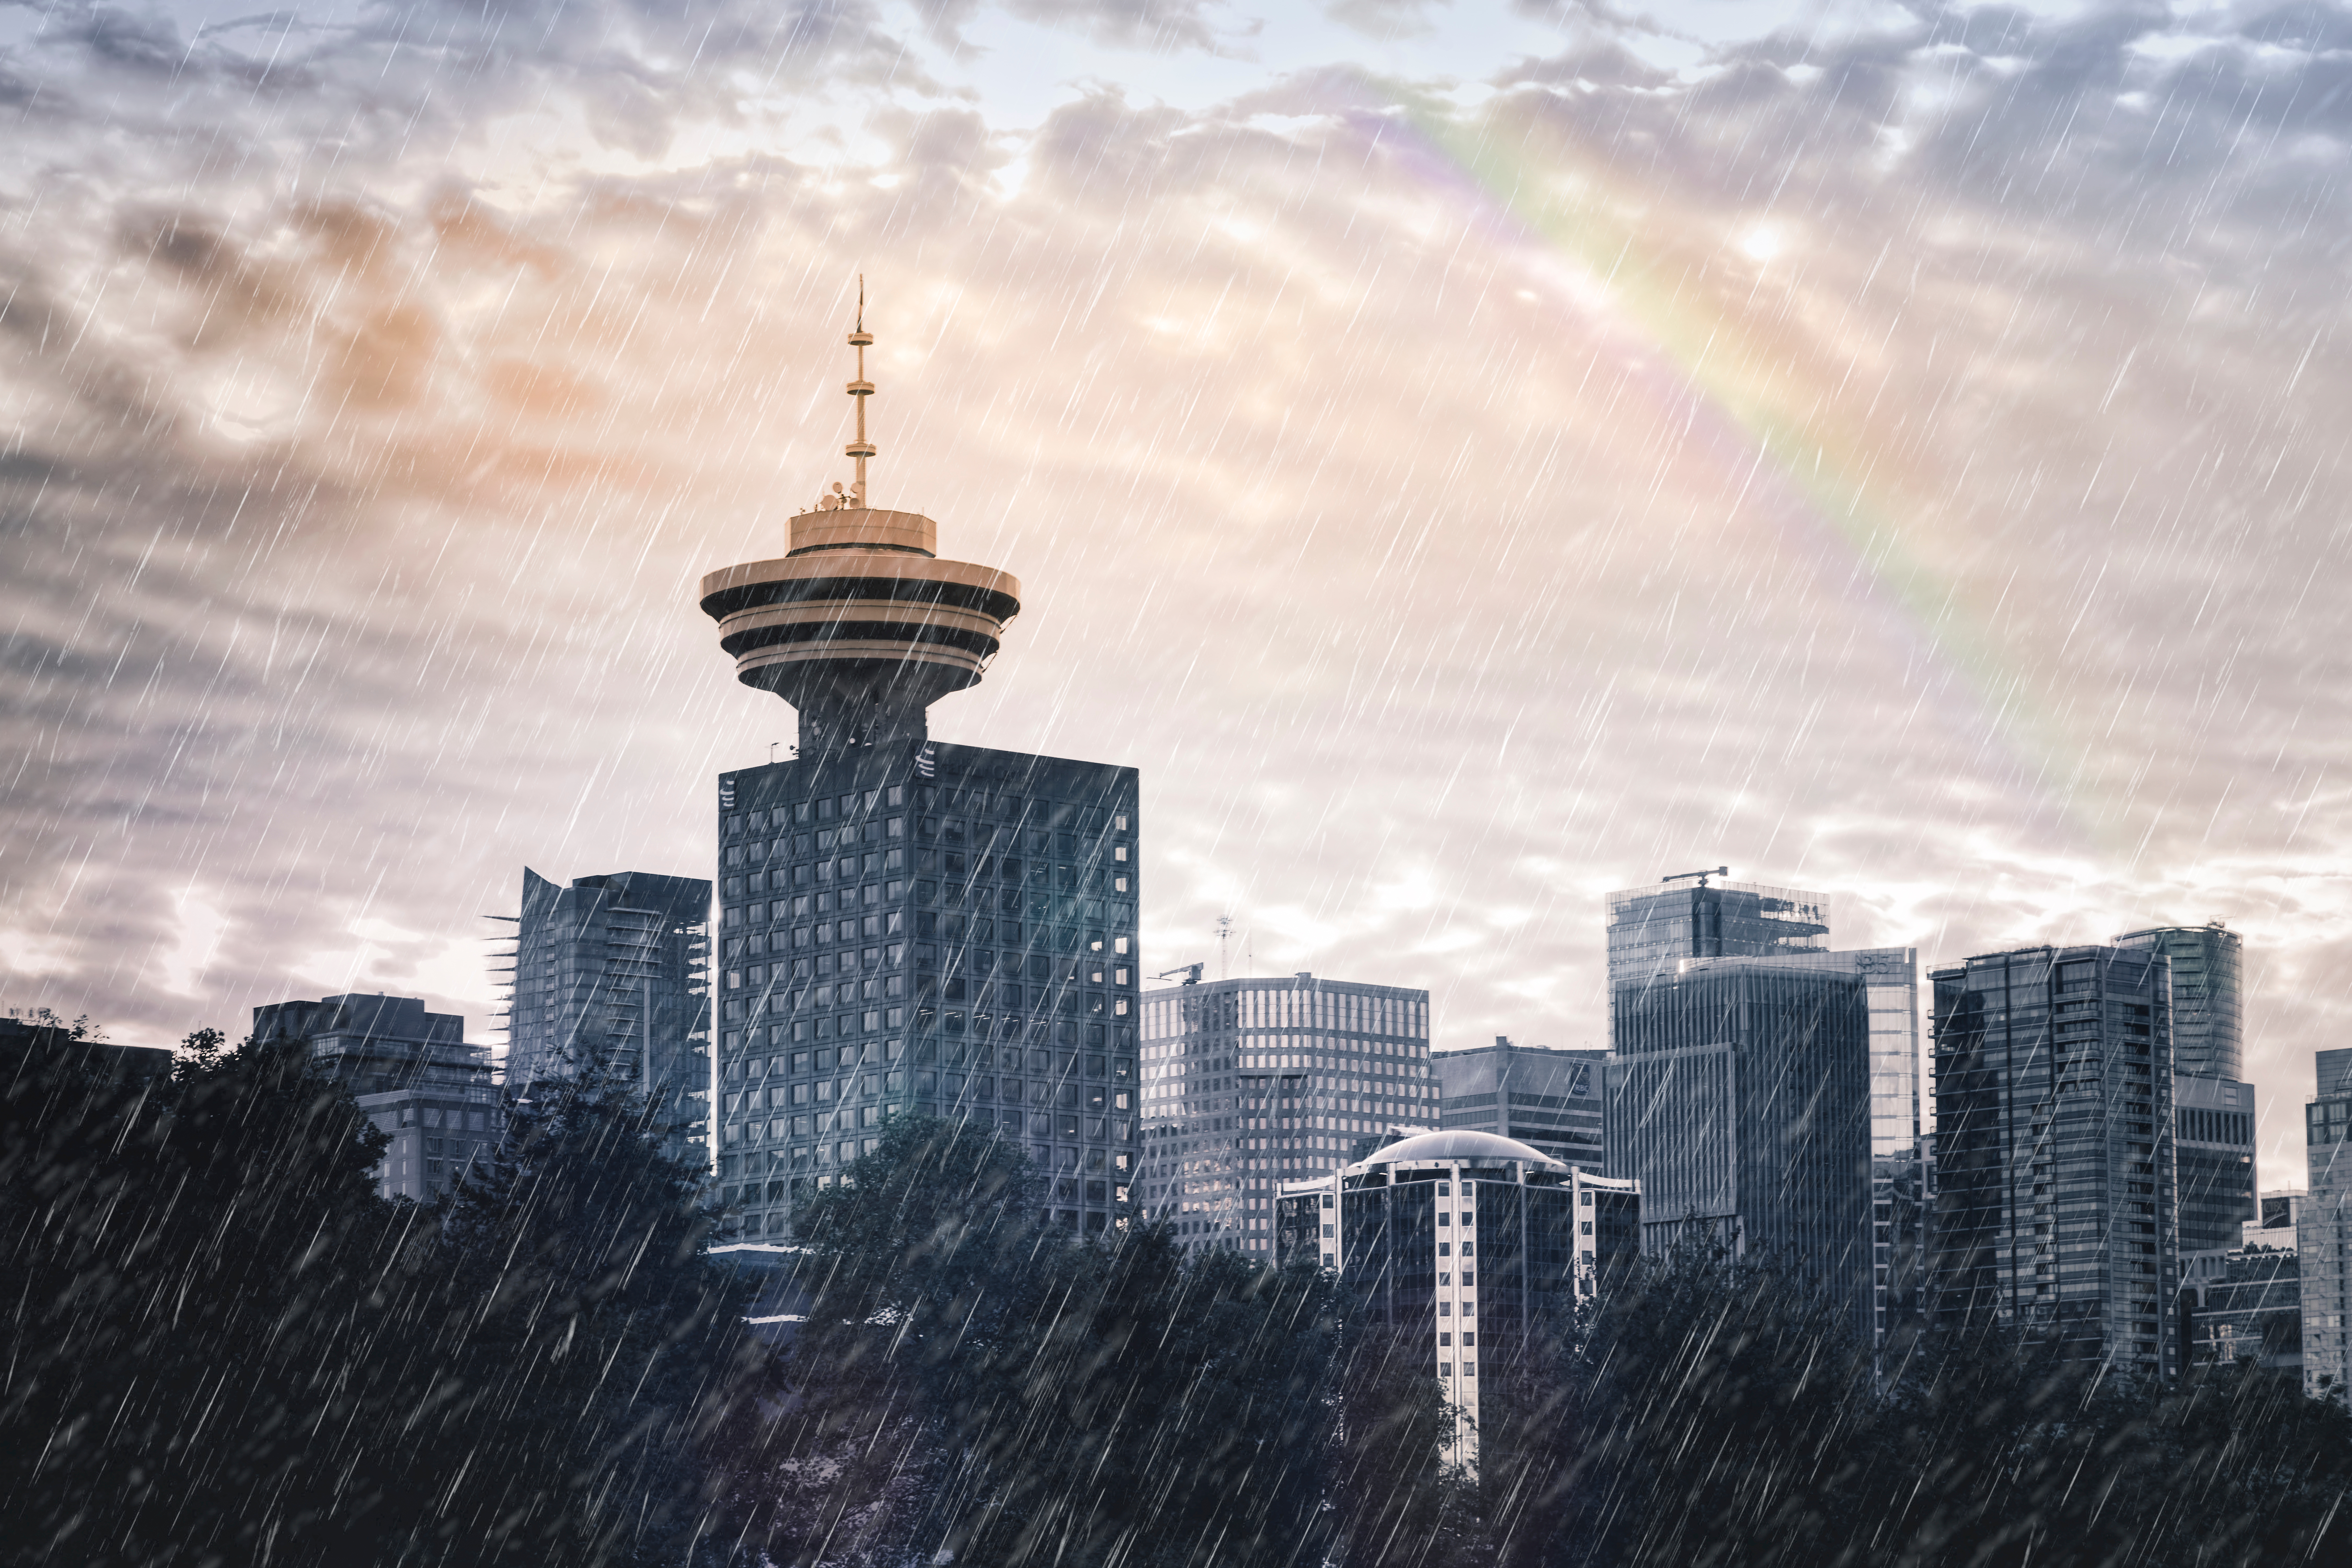 Another Storm expected to hit Metro Vancouver amidst already delayed Spring